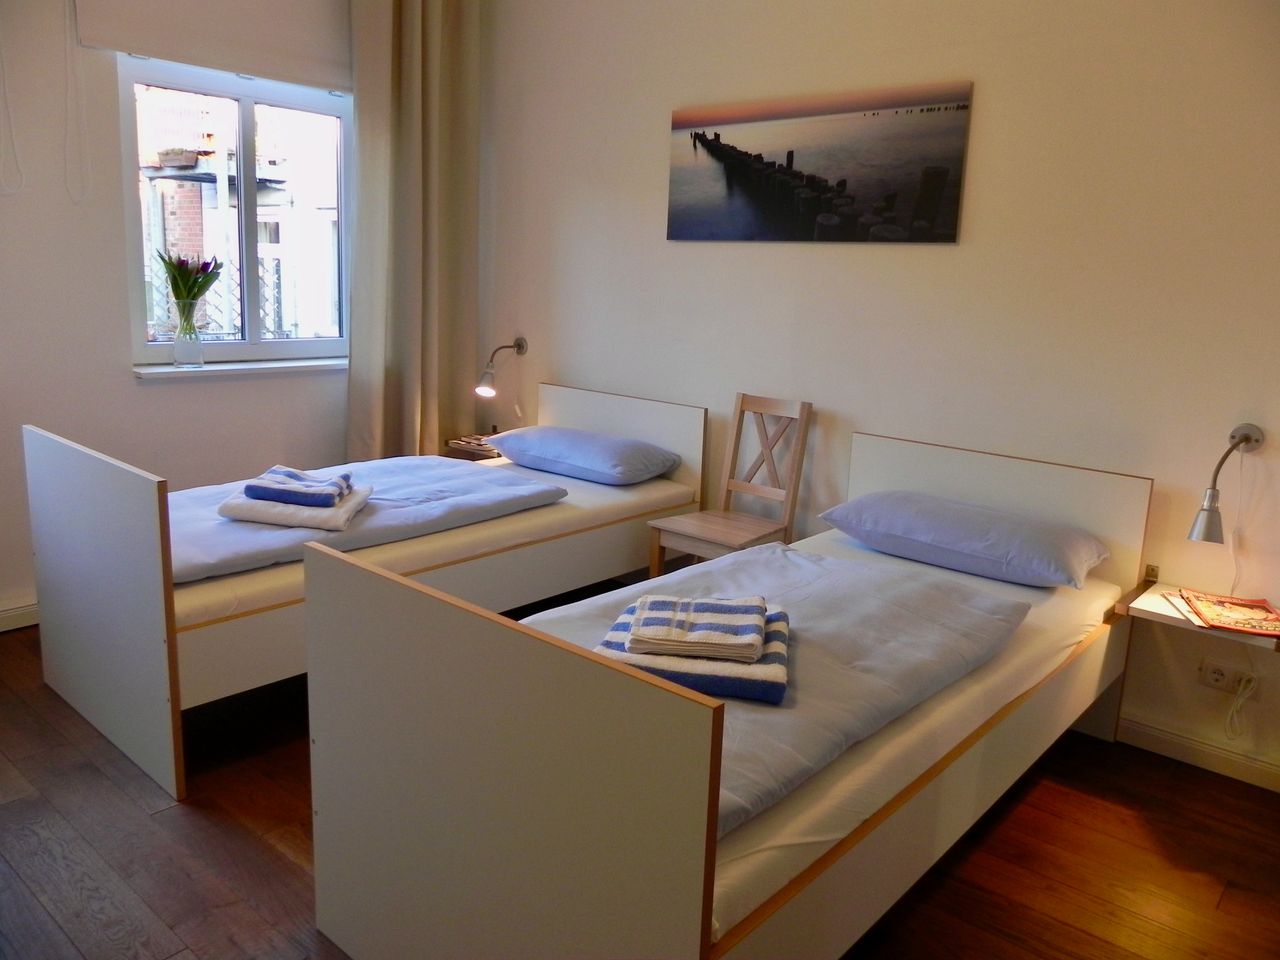 Top location! Furnished 2-room-apartment with balcony, parking is optional